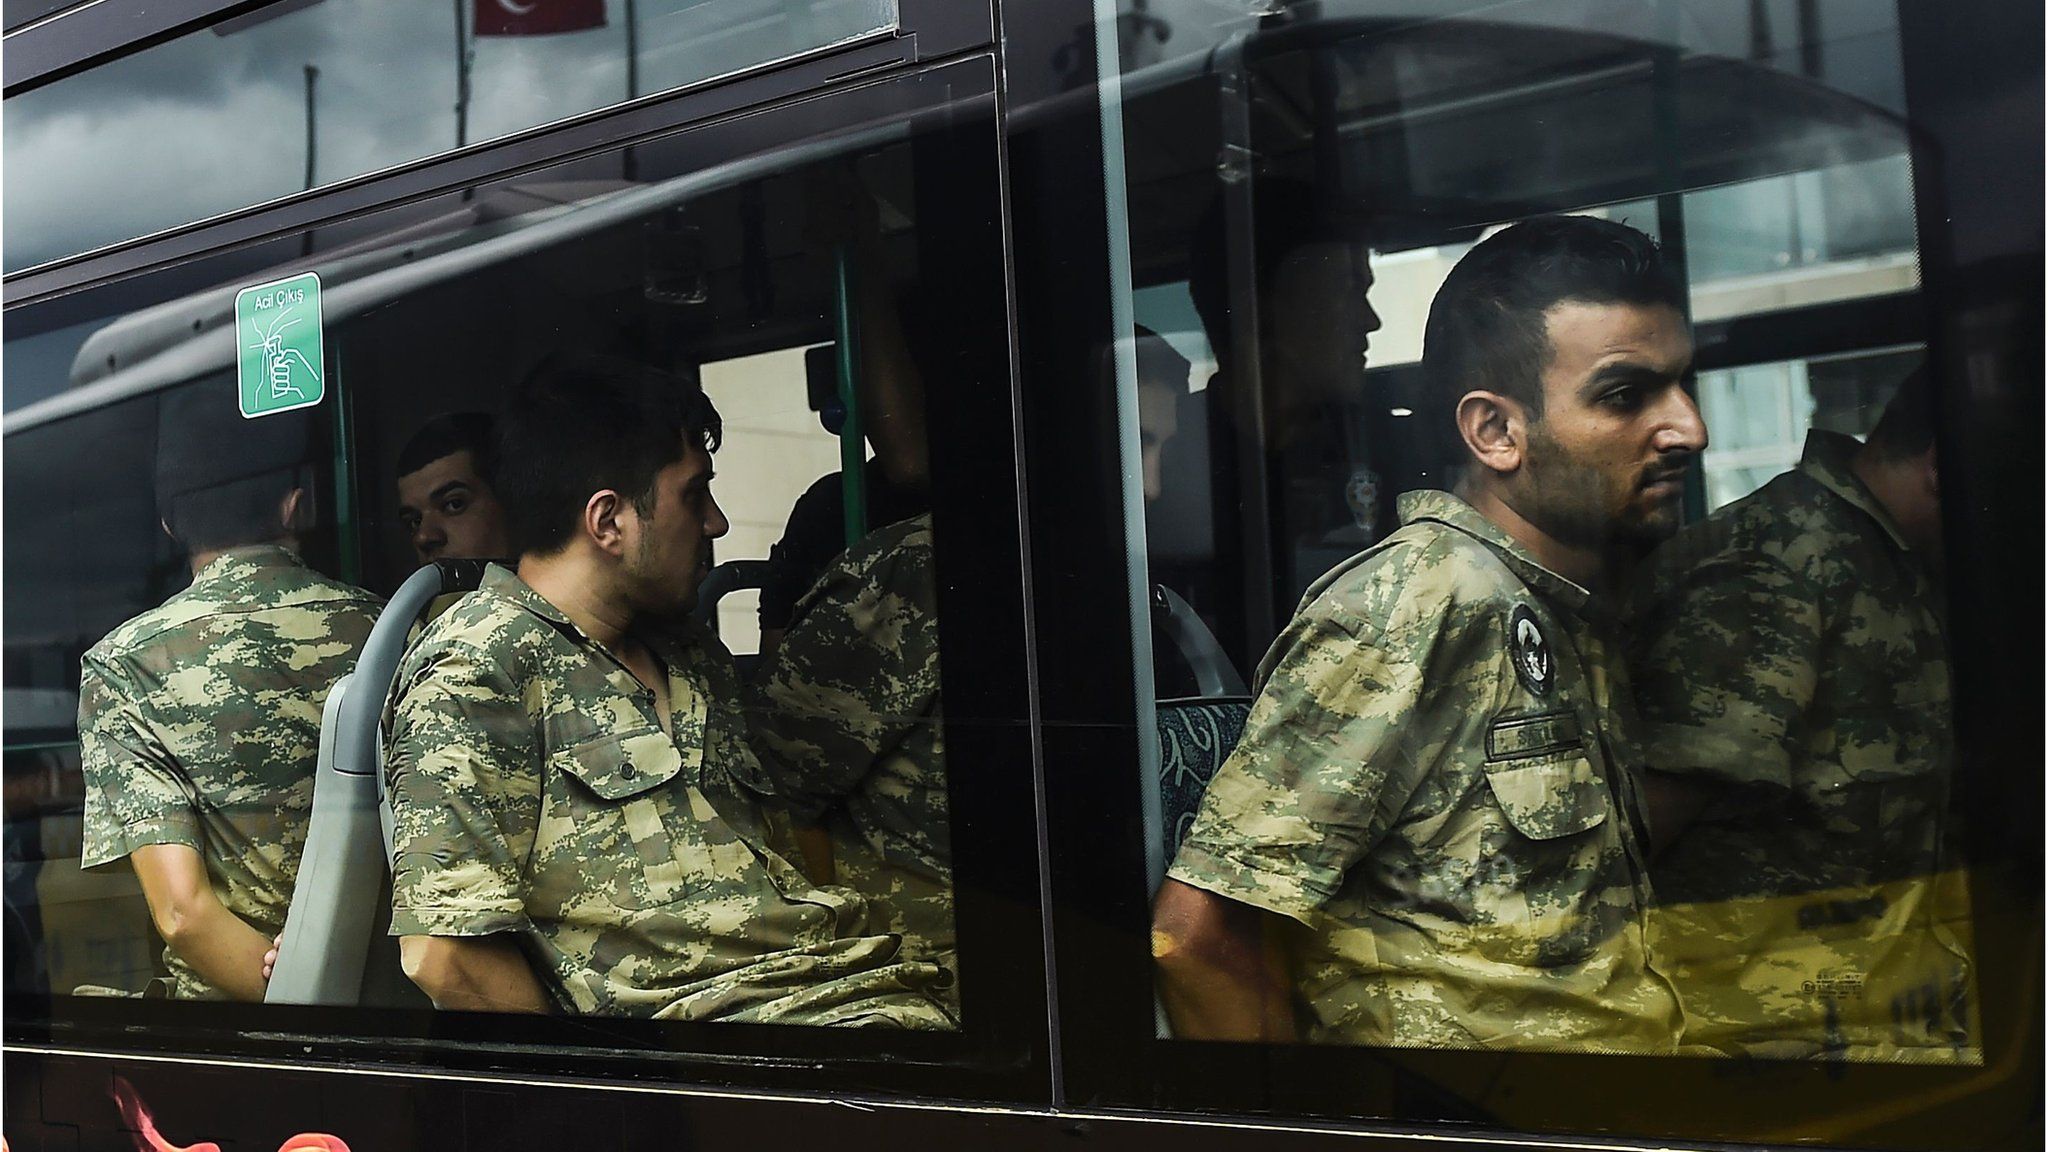 Detained Turkish soldiers who allegedly took part in a military coup arrive in a bus at the courthouse in Istanbul (20 July 2016)